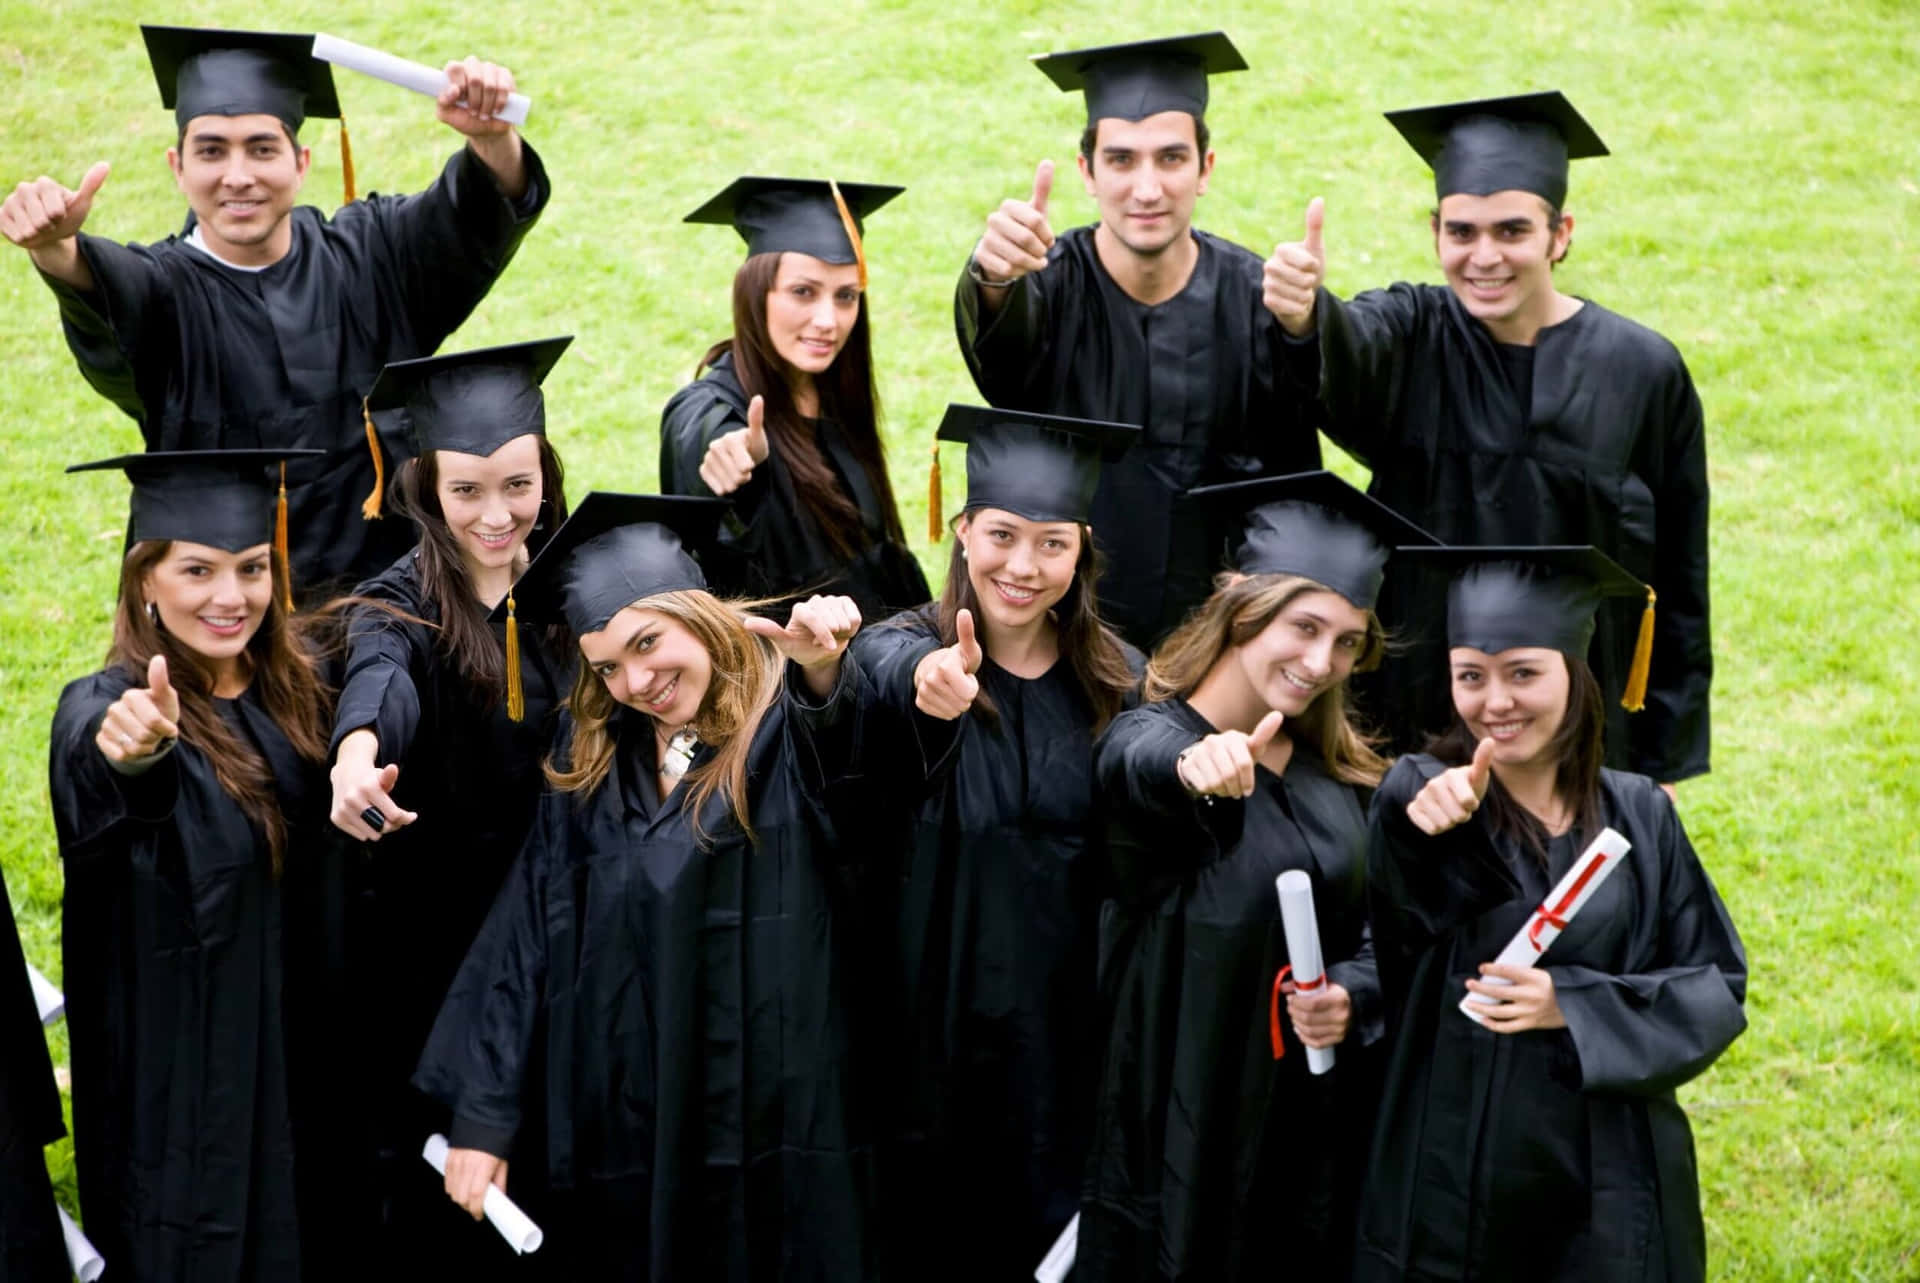 A Group Of Graduates Posing For A Picture